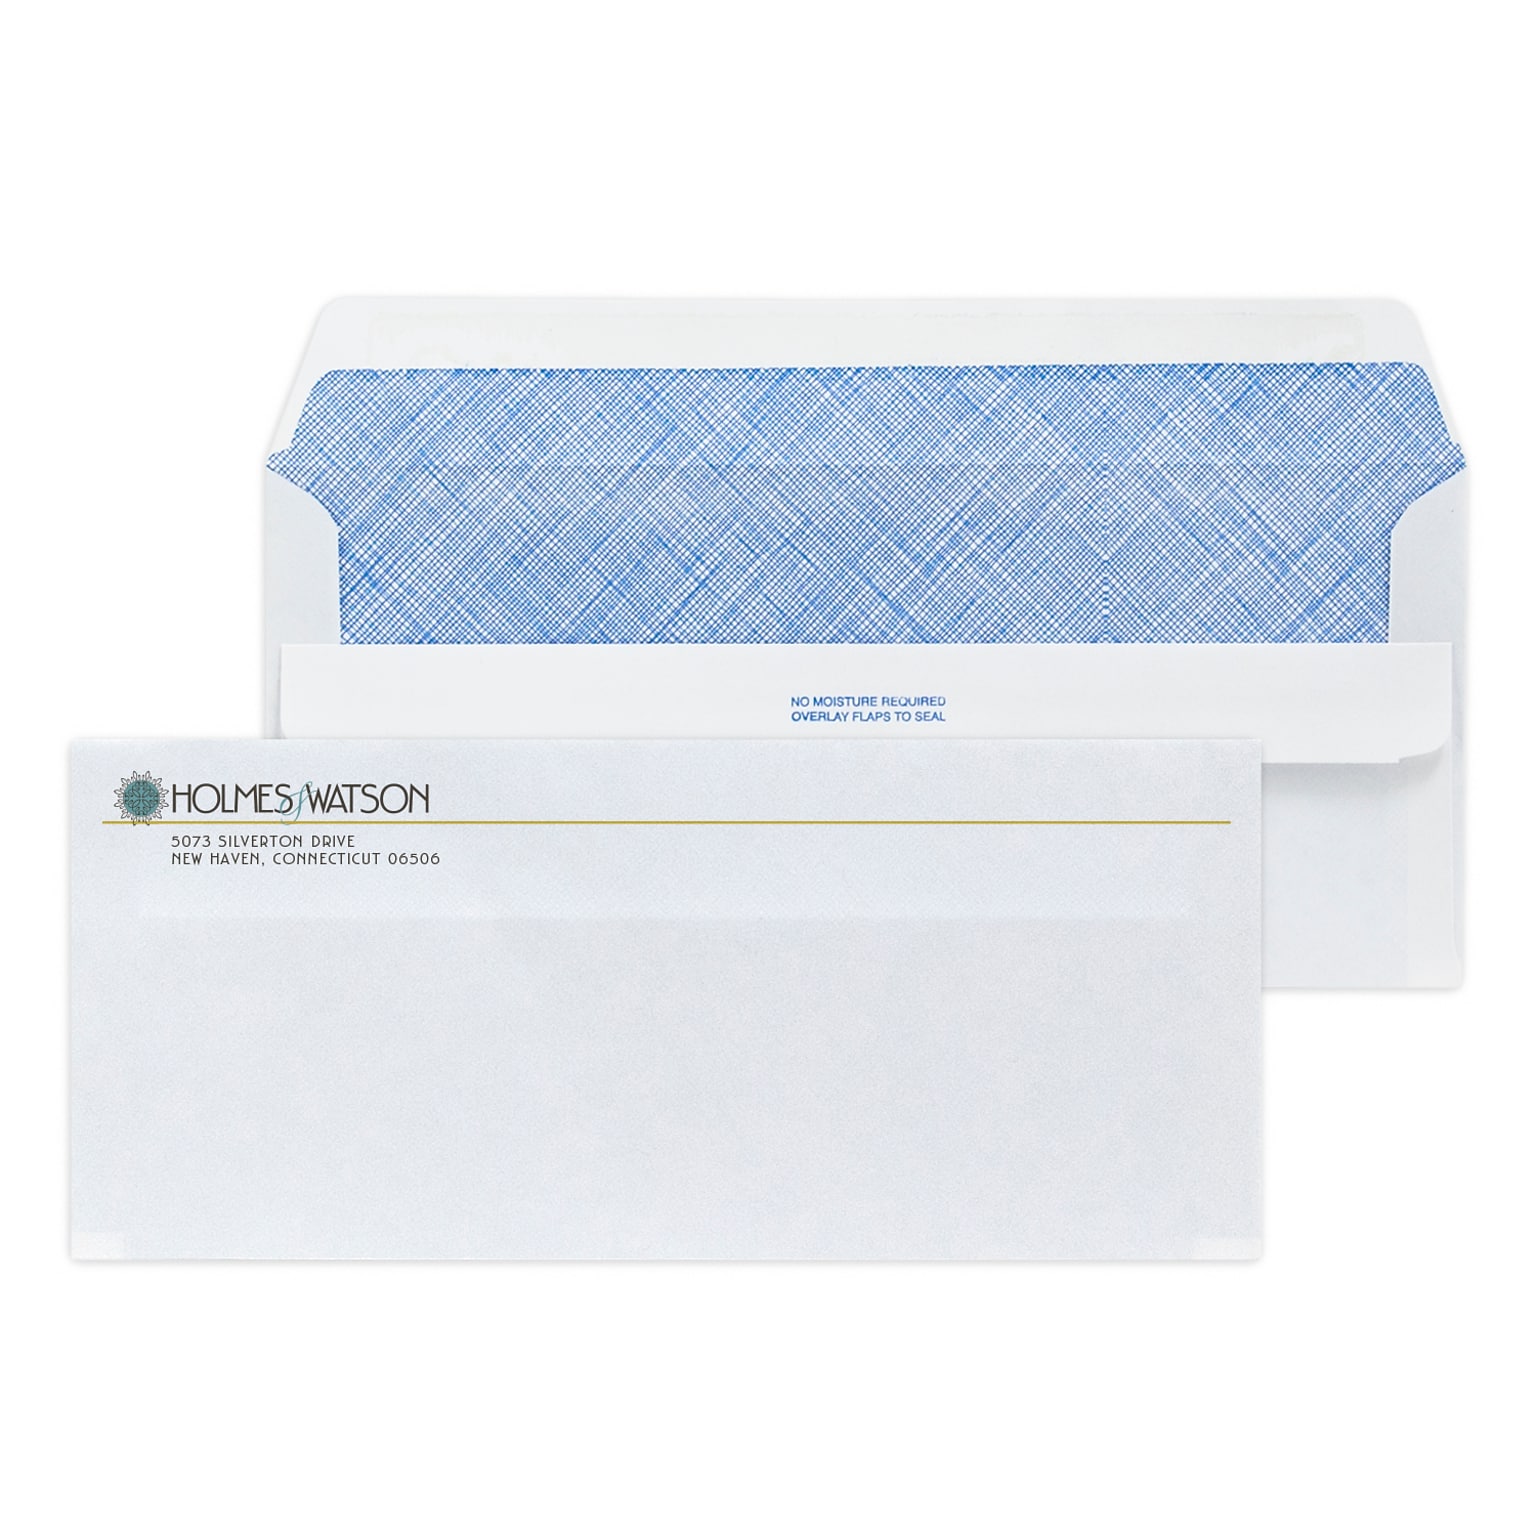 Custom Full Color #10 Self Seal Envelopes with Security Tint, 4 1/4 x 9 1/2, 24# White Wove, 250 / Pack